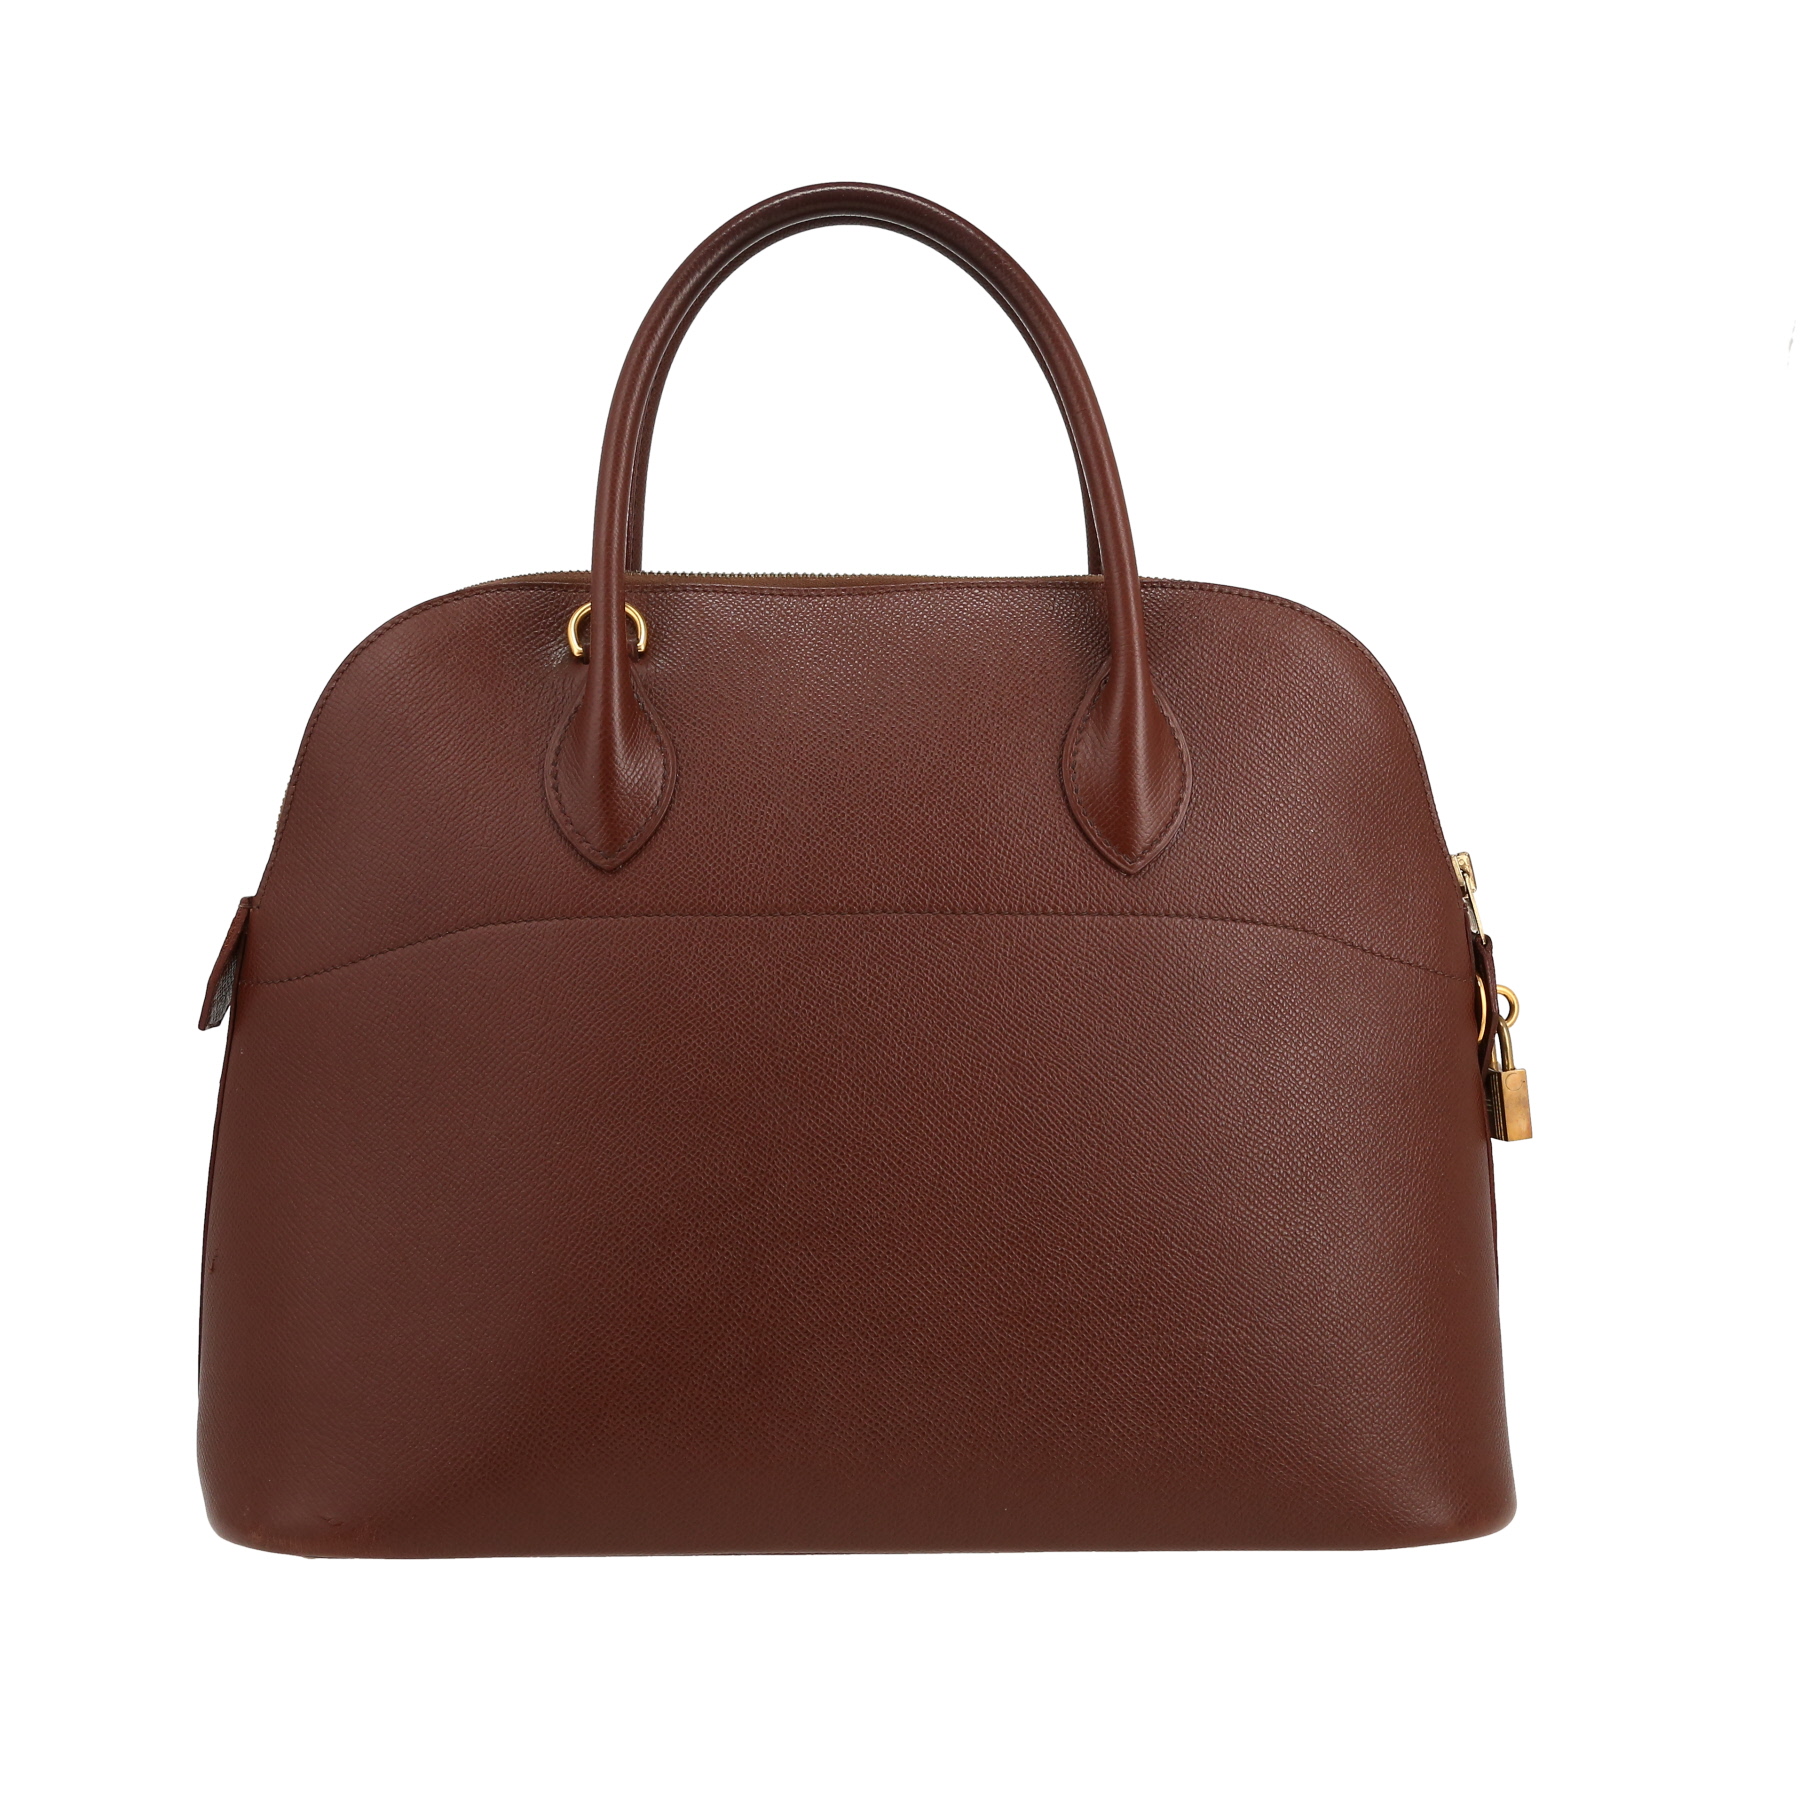 Bolide 35 cm Handbag In Brown Courchevel Leather